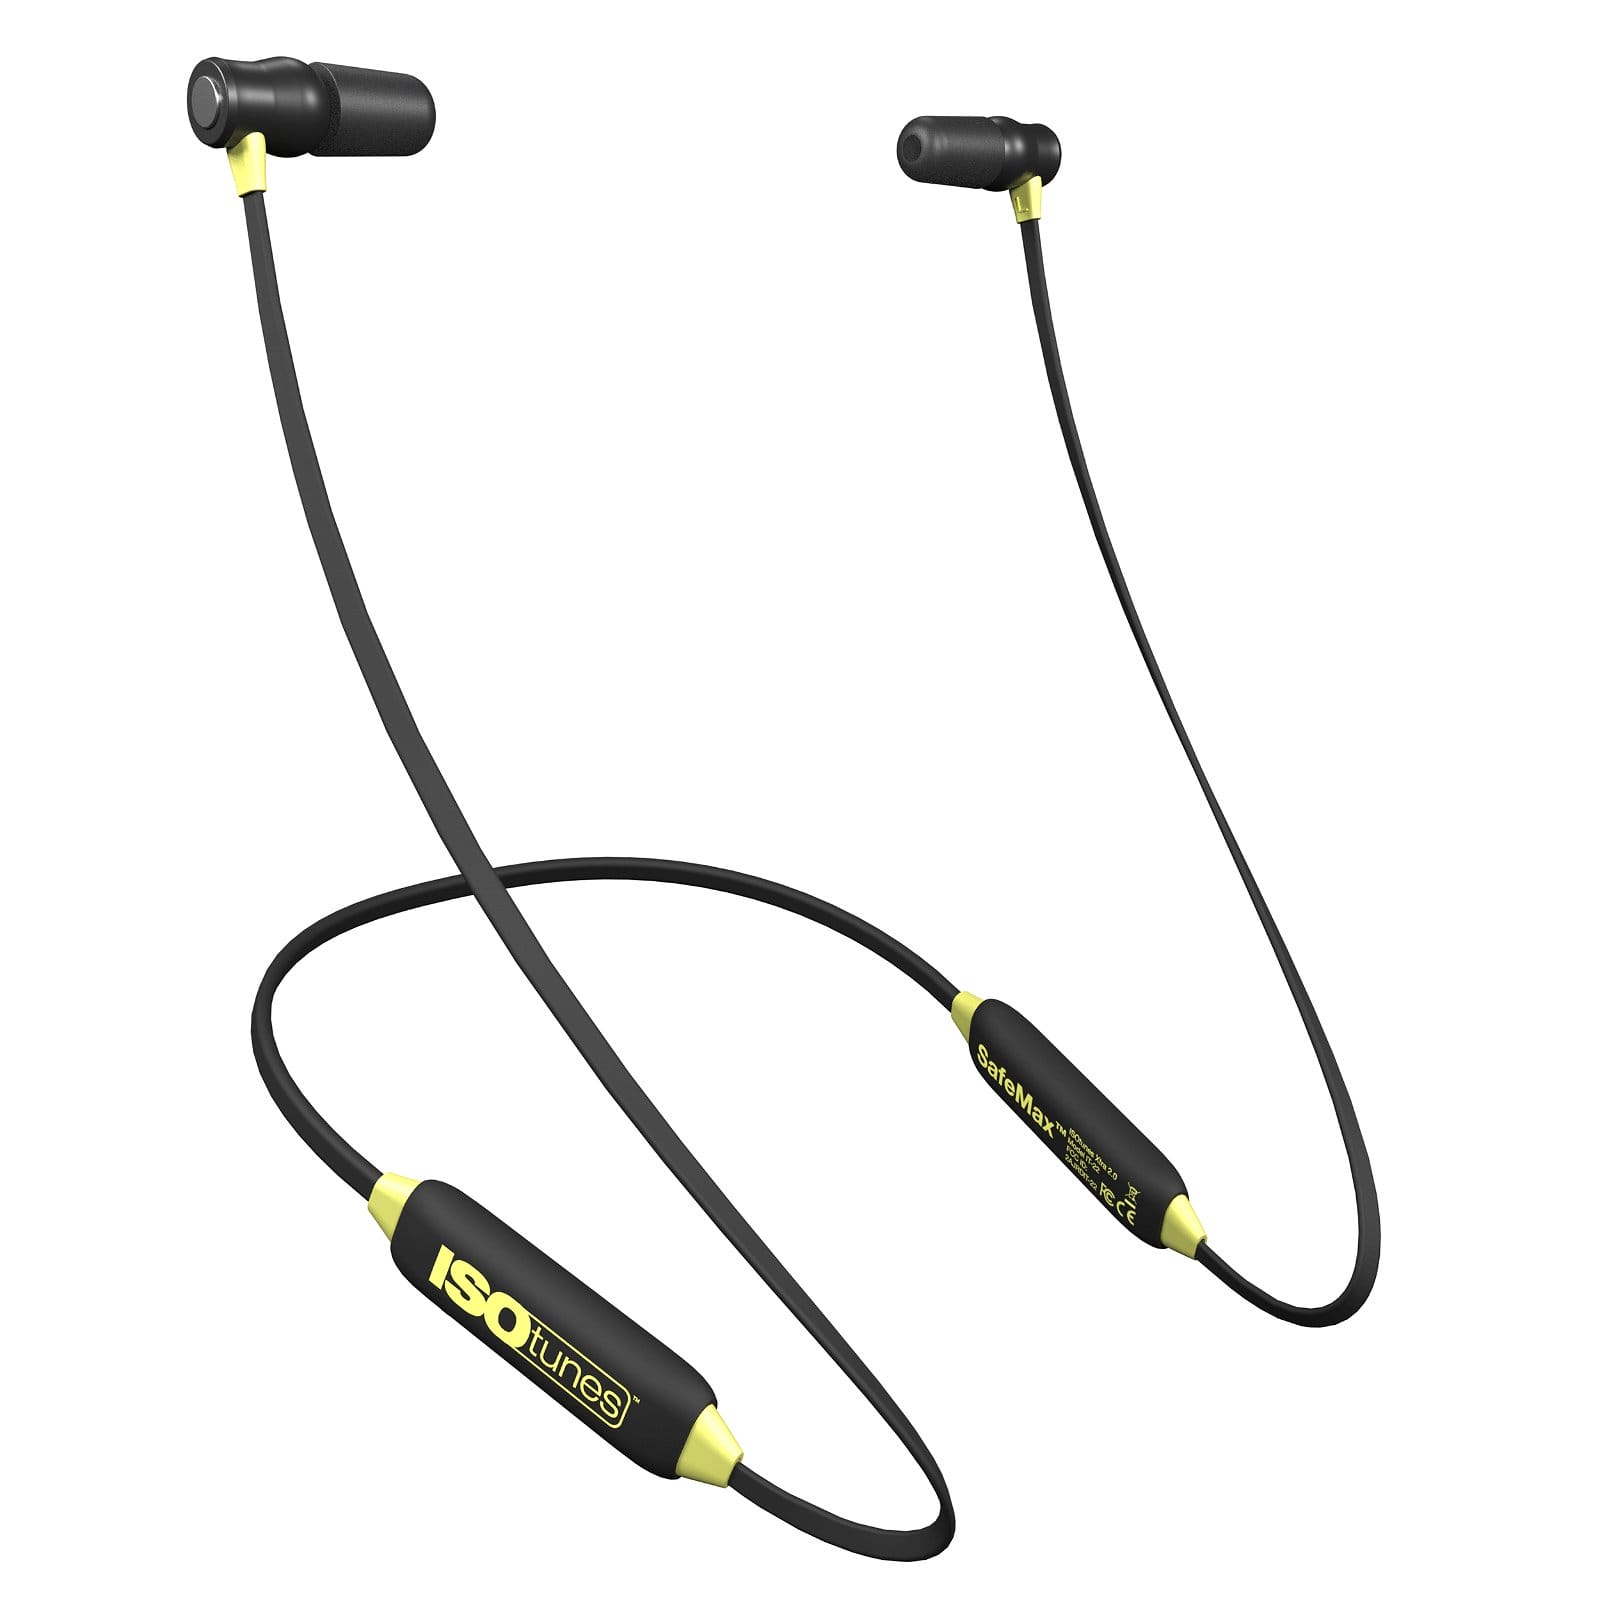 XTRA 2.0 Bluetooth Noise Isolating Earbuds